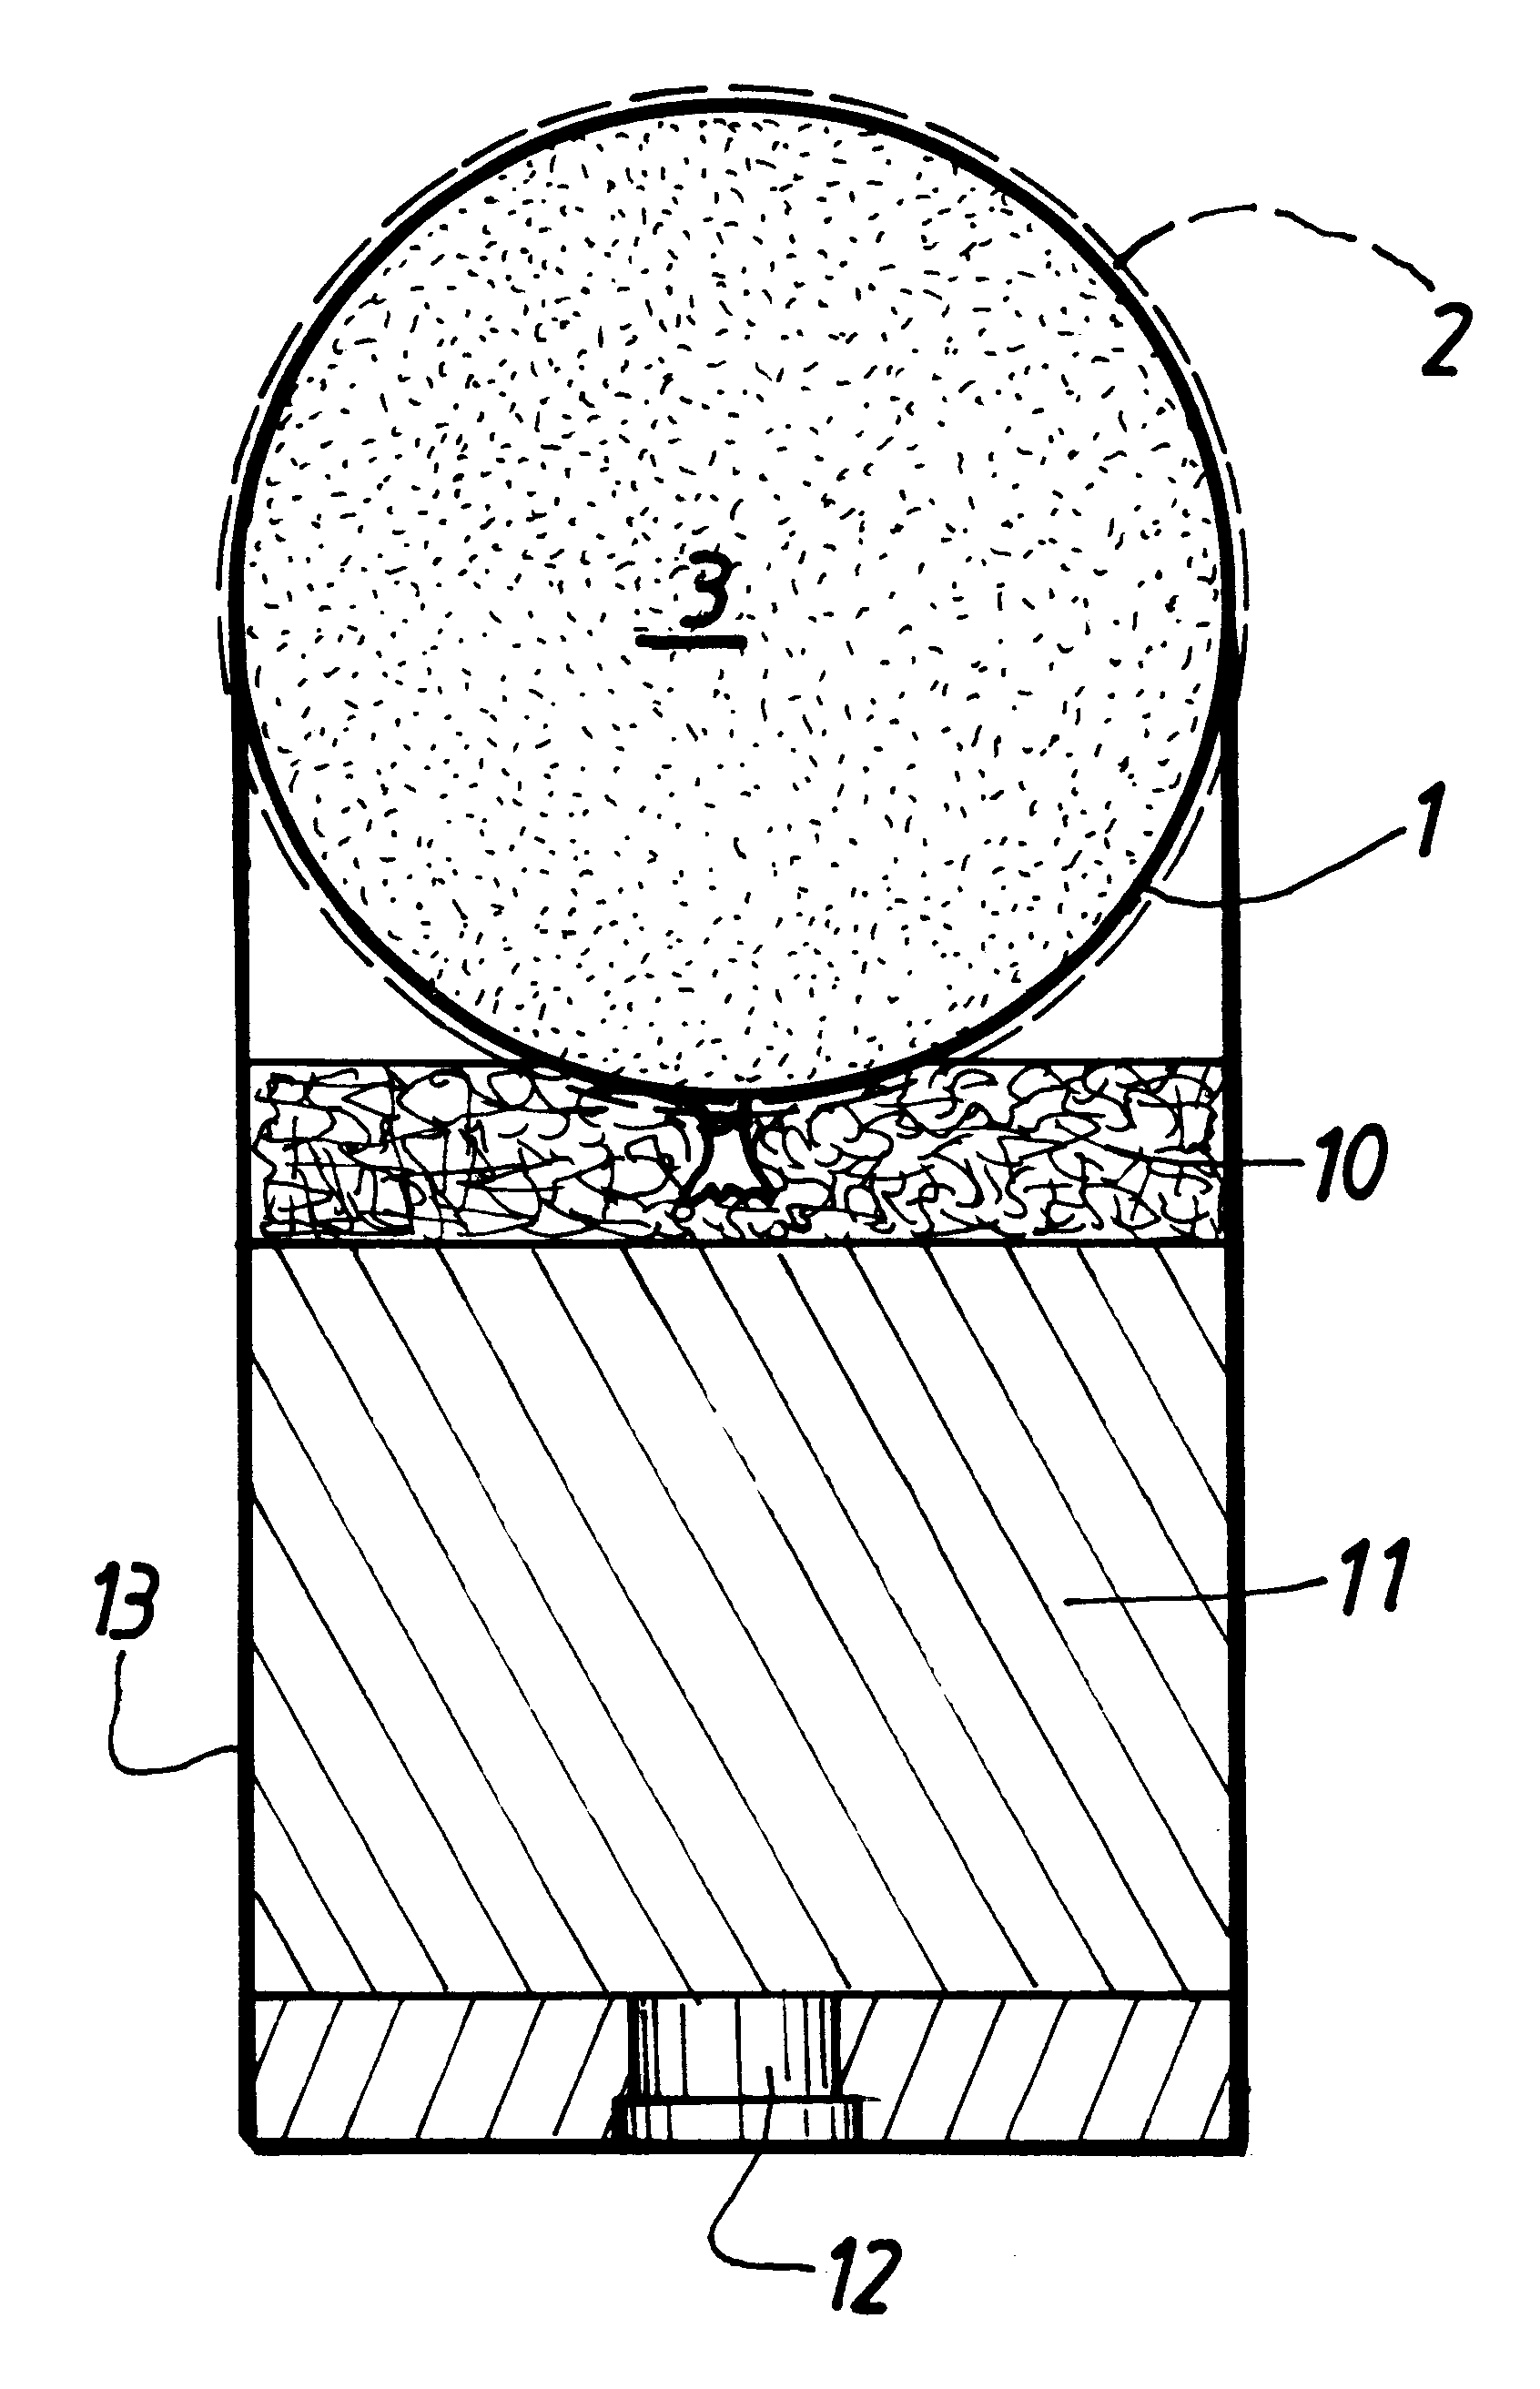 Non-lethal projectile with fine grain solid in elastic infrangible envelope